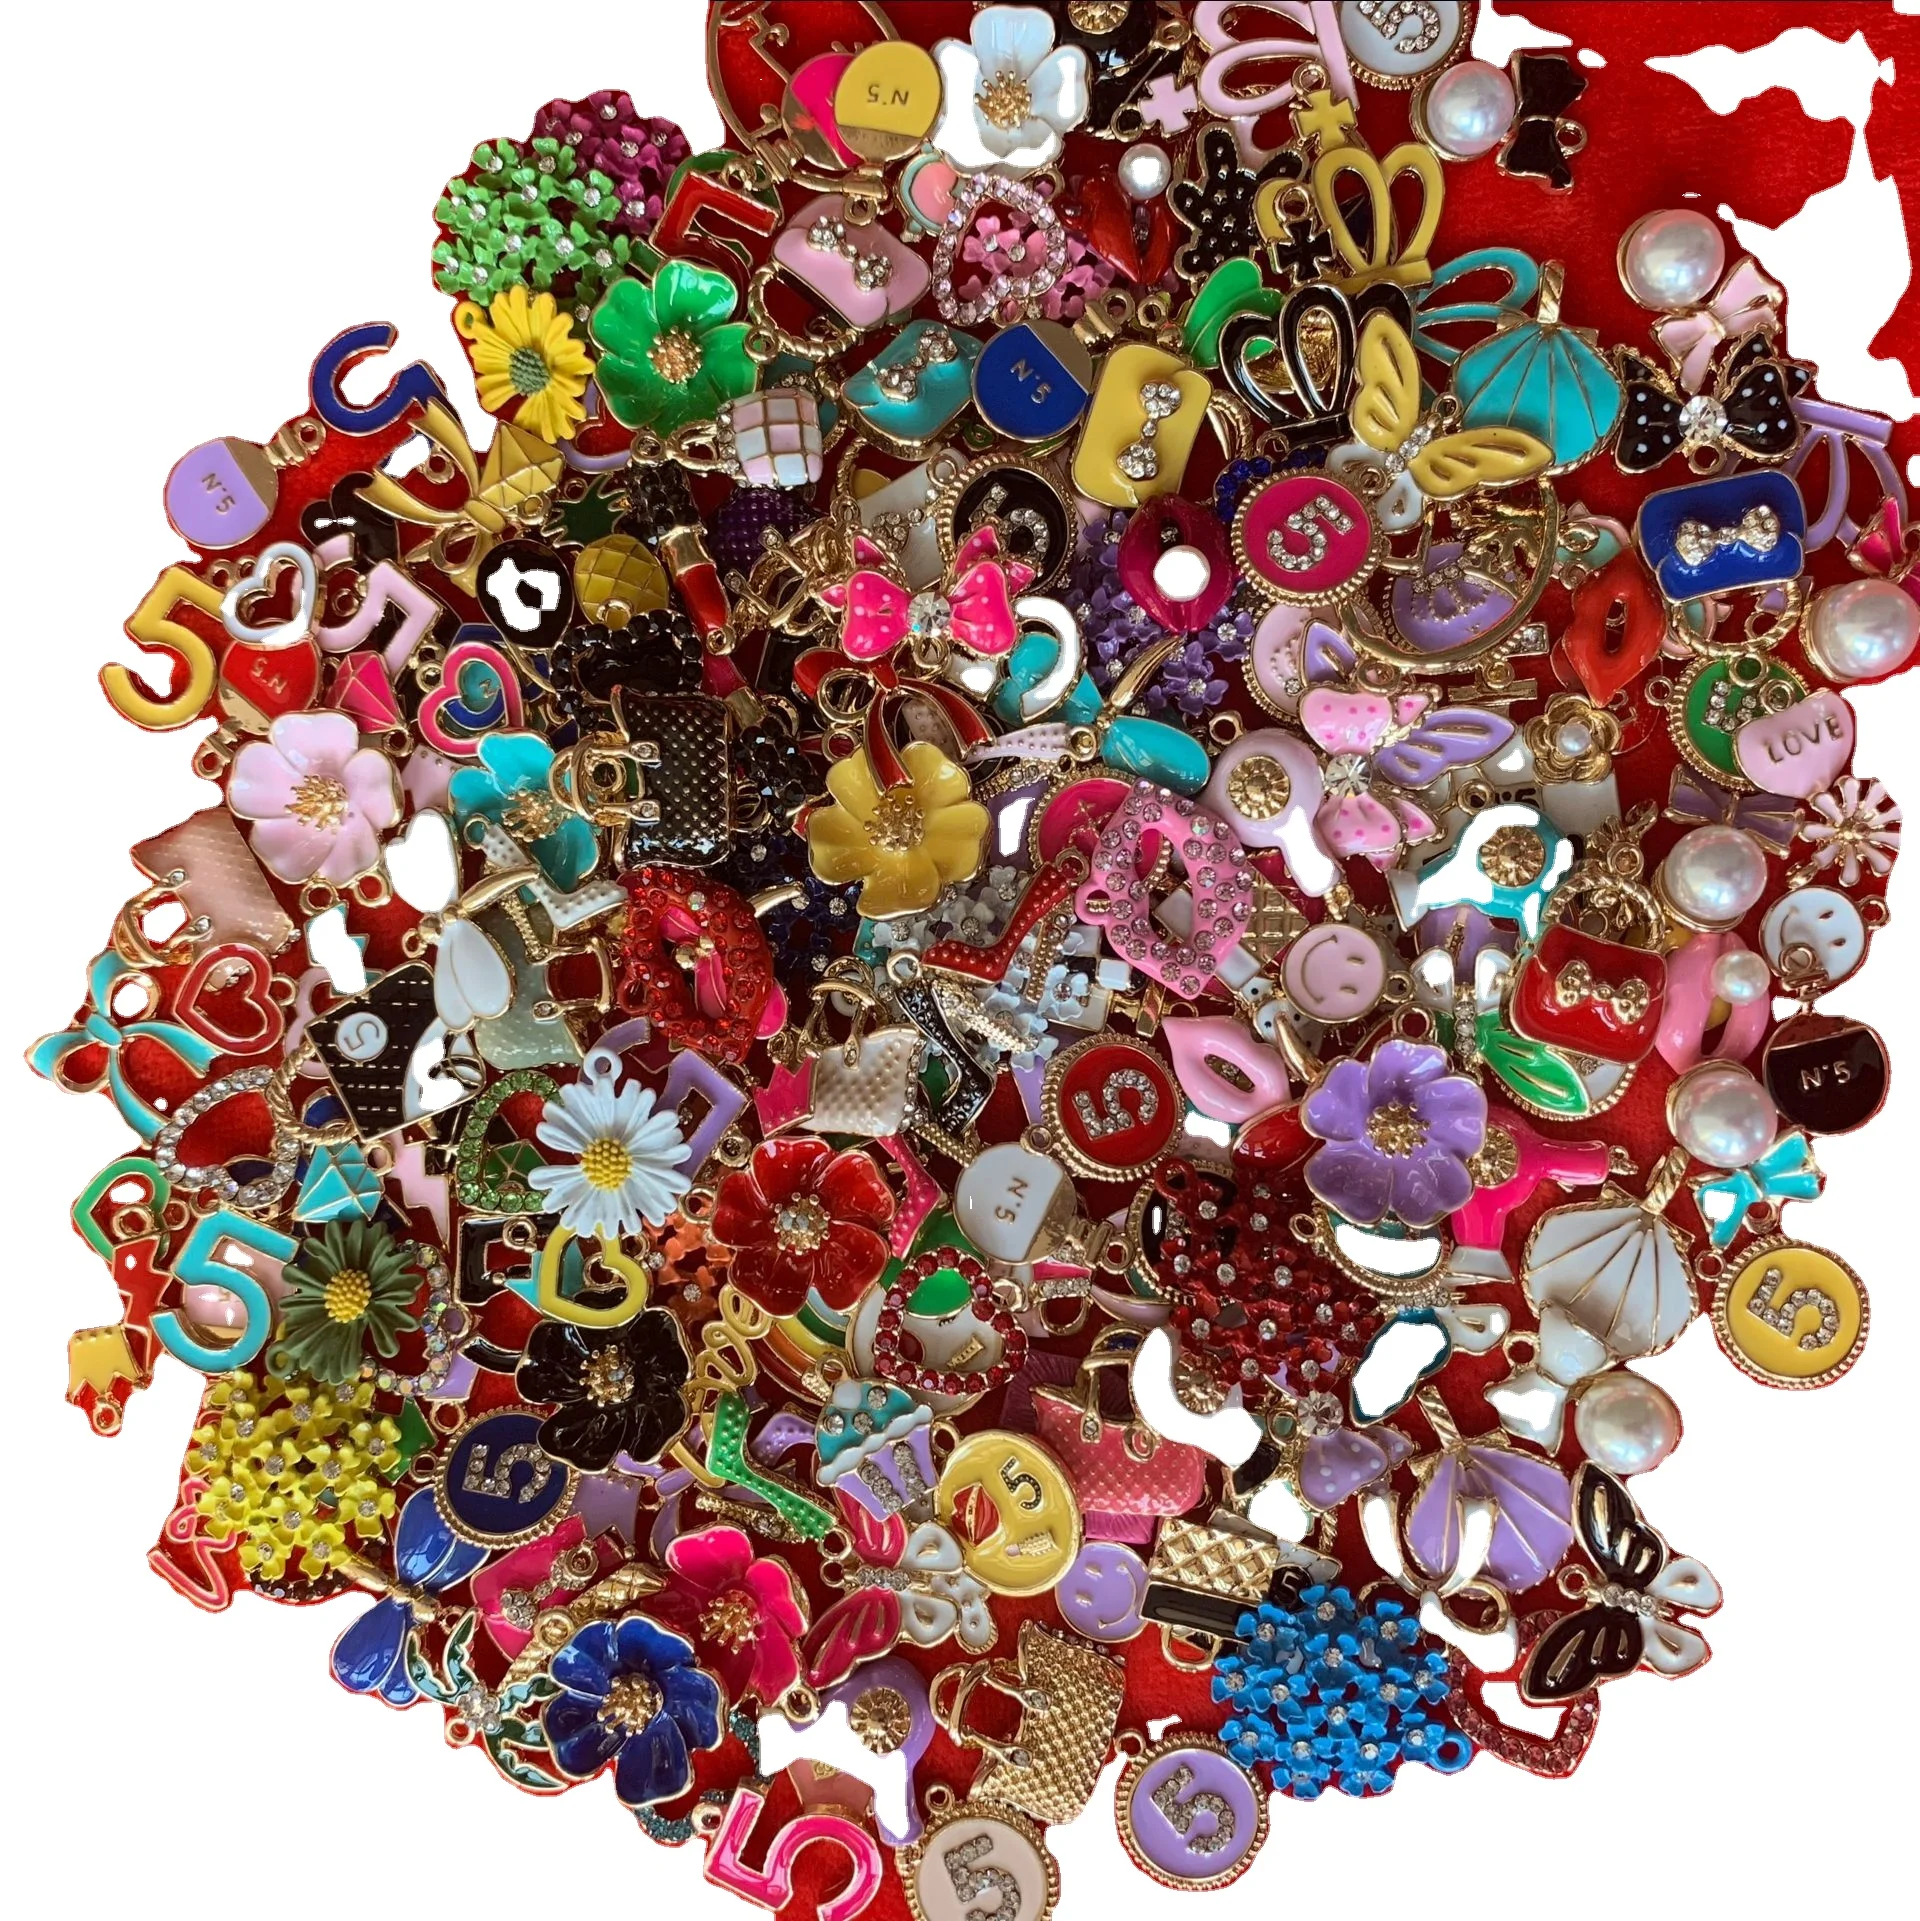 

250pcs mix lot various color enamel charms girly golden metal jewelry charms for bracelets bangles designer charms mix stocks